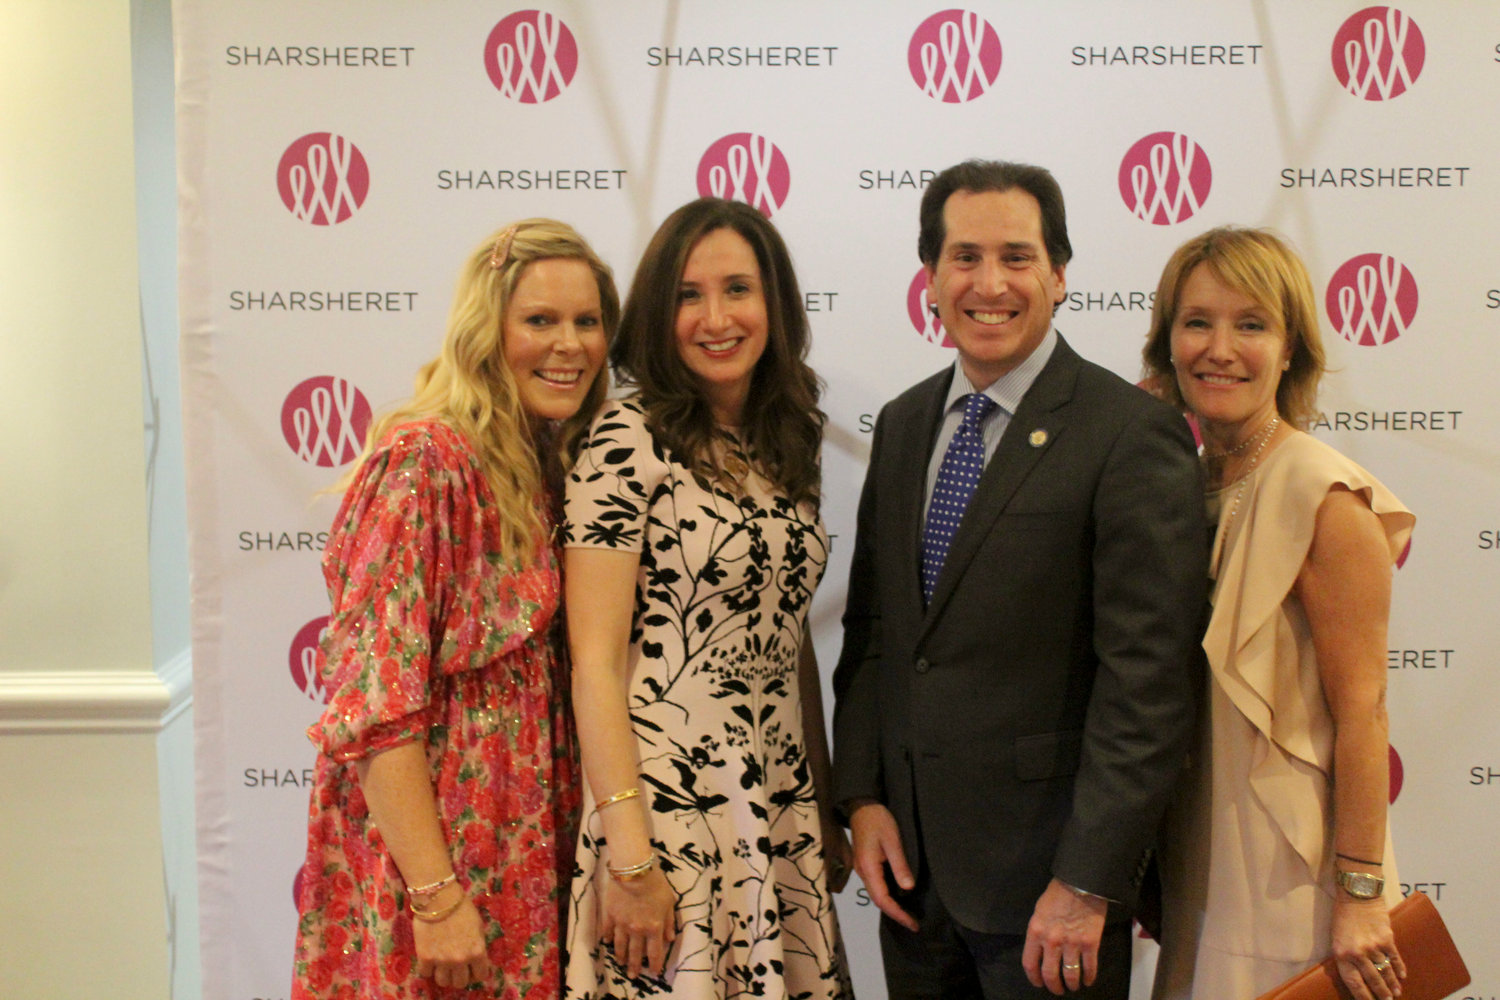 The Woodmere Club hosted the annual Long Island Sharsheret Committee barbecue. From left were guest speaker Riva Goldschmiedt, event co-chair Esther Zeidman, State Sen. Todd Kaminsky and board member Alissa Zagha.